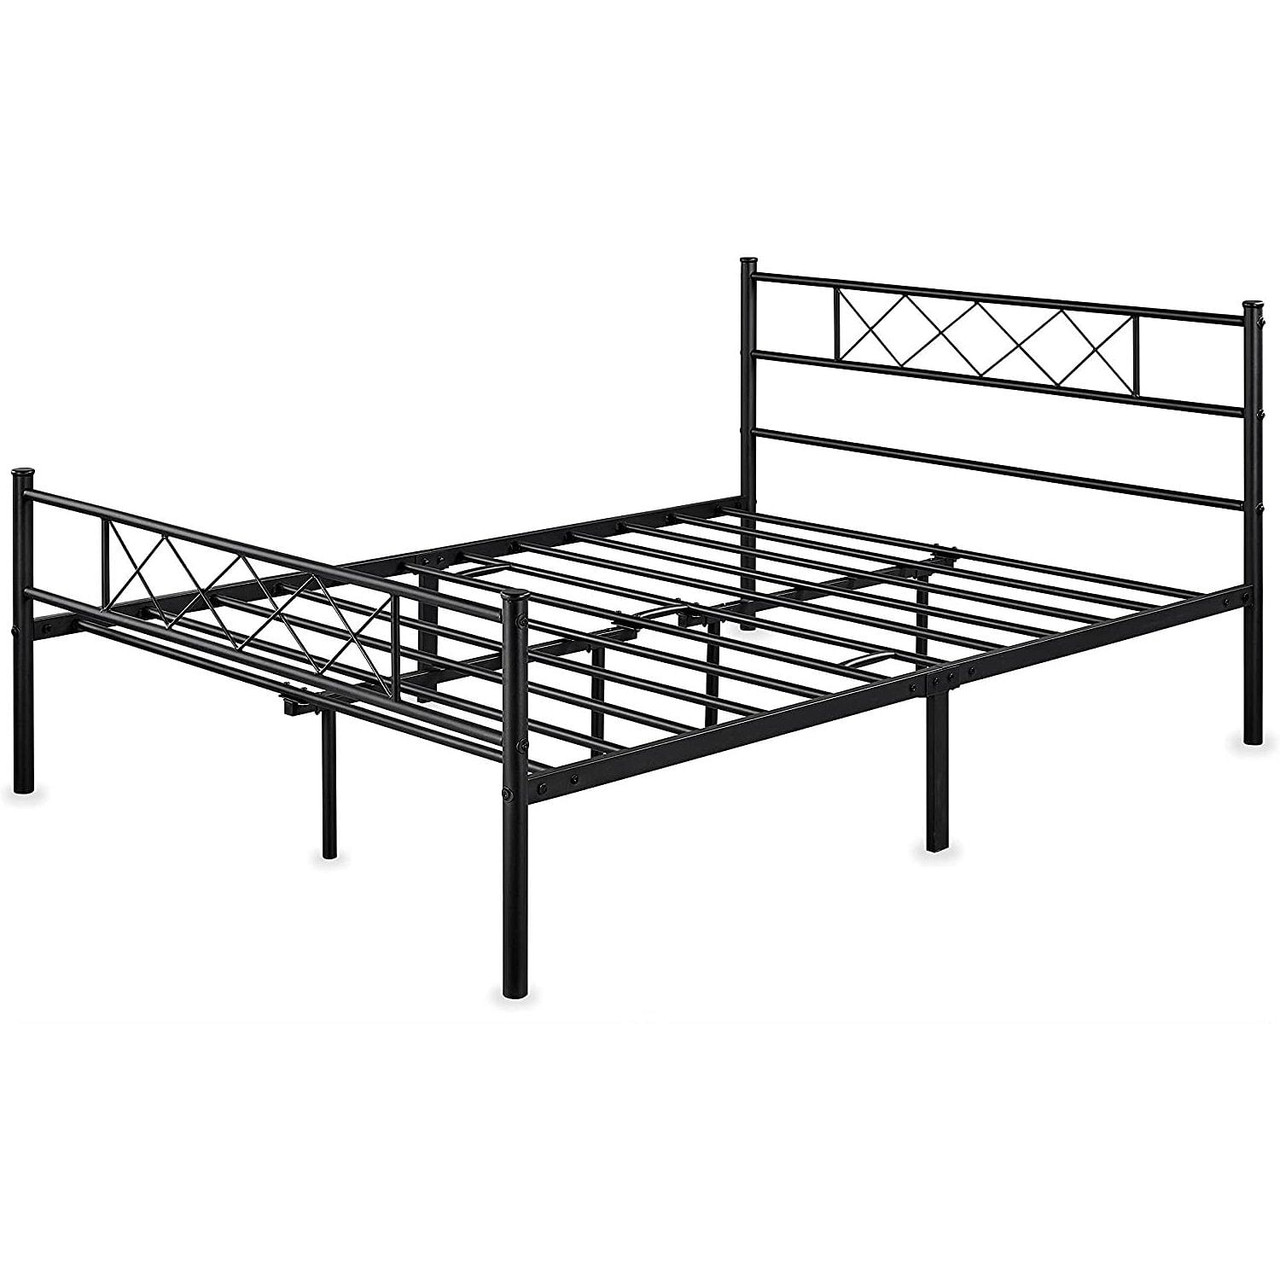 Queen Size Traditional Powder Coated Slatted Metal Platform Bed